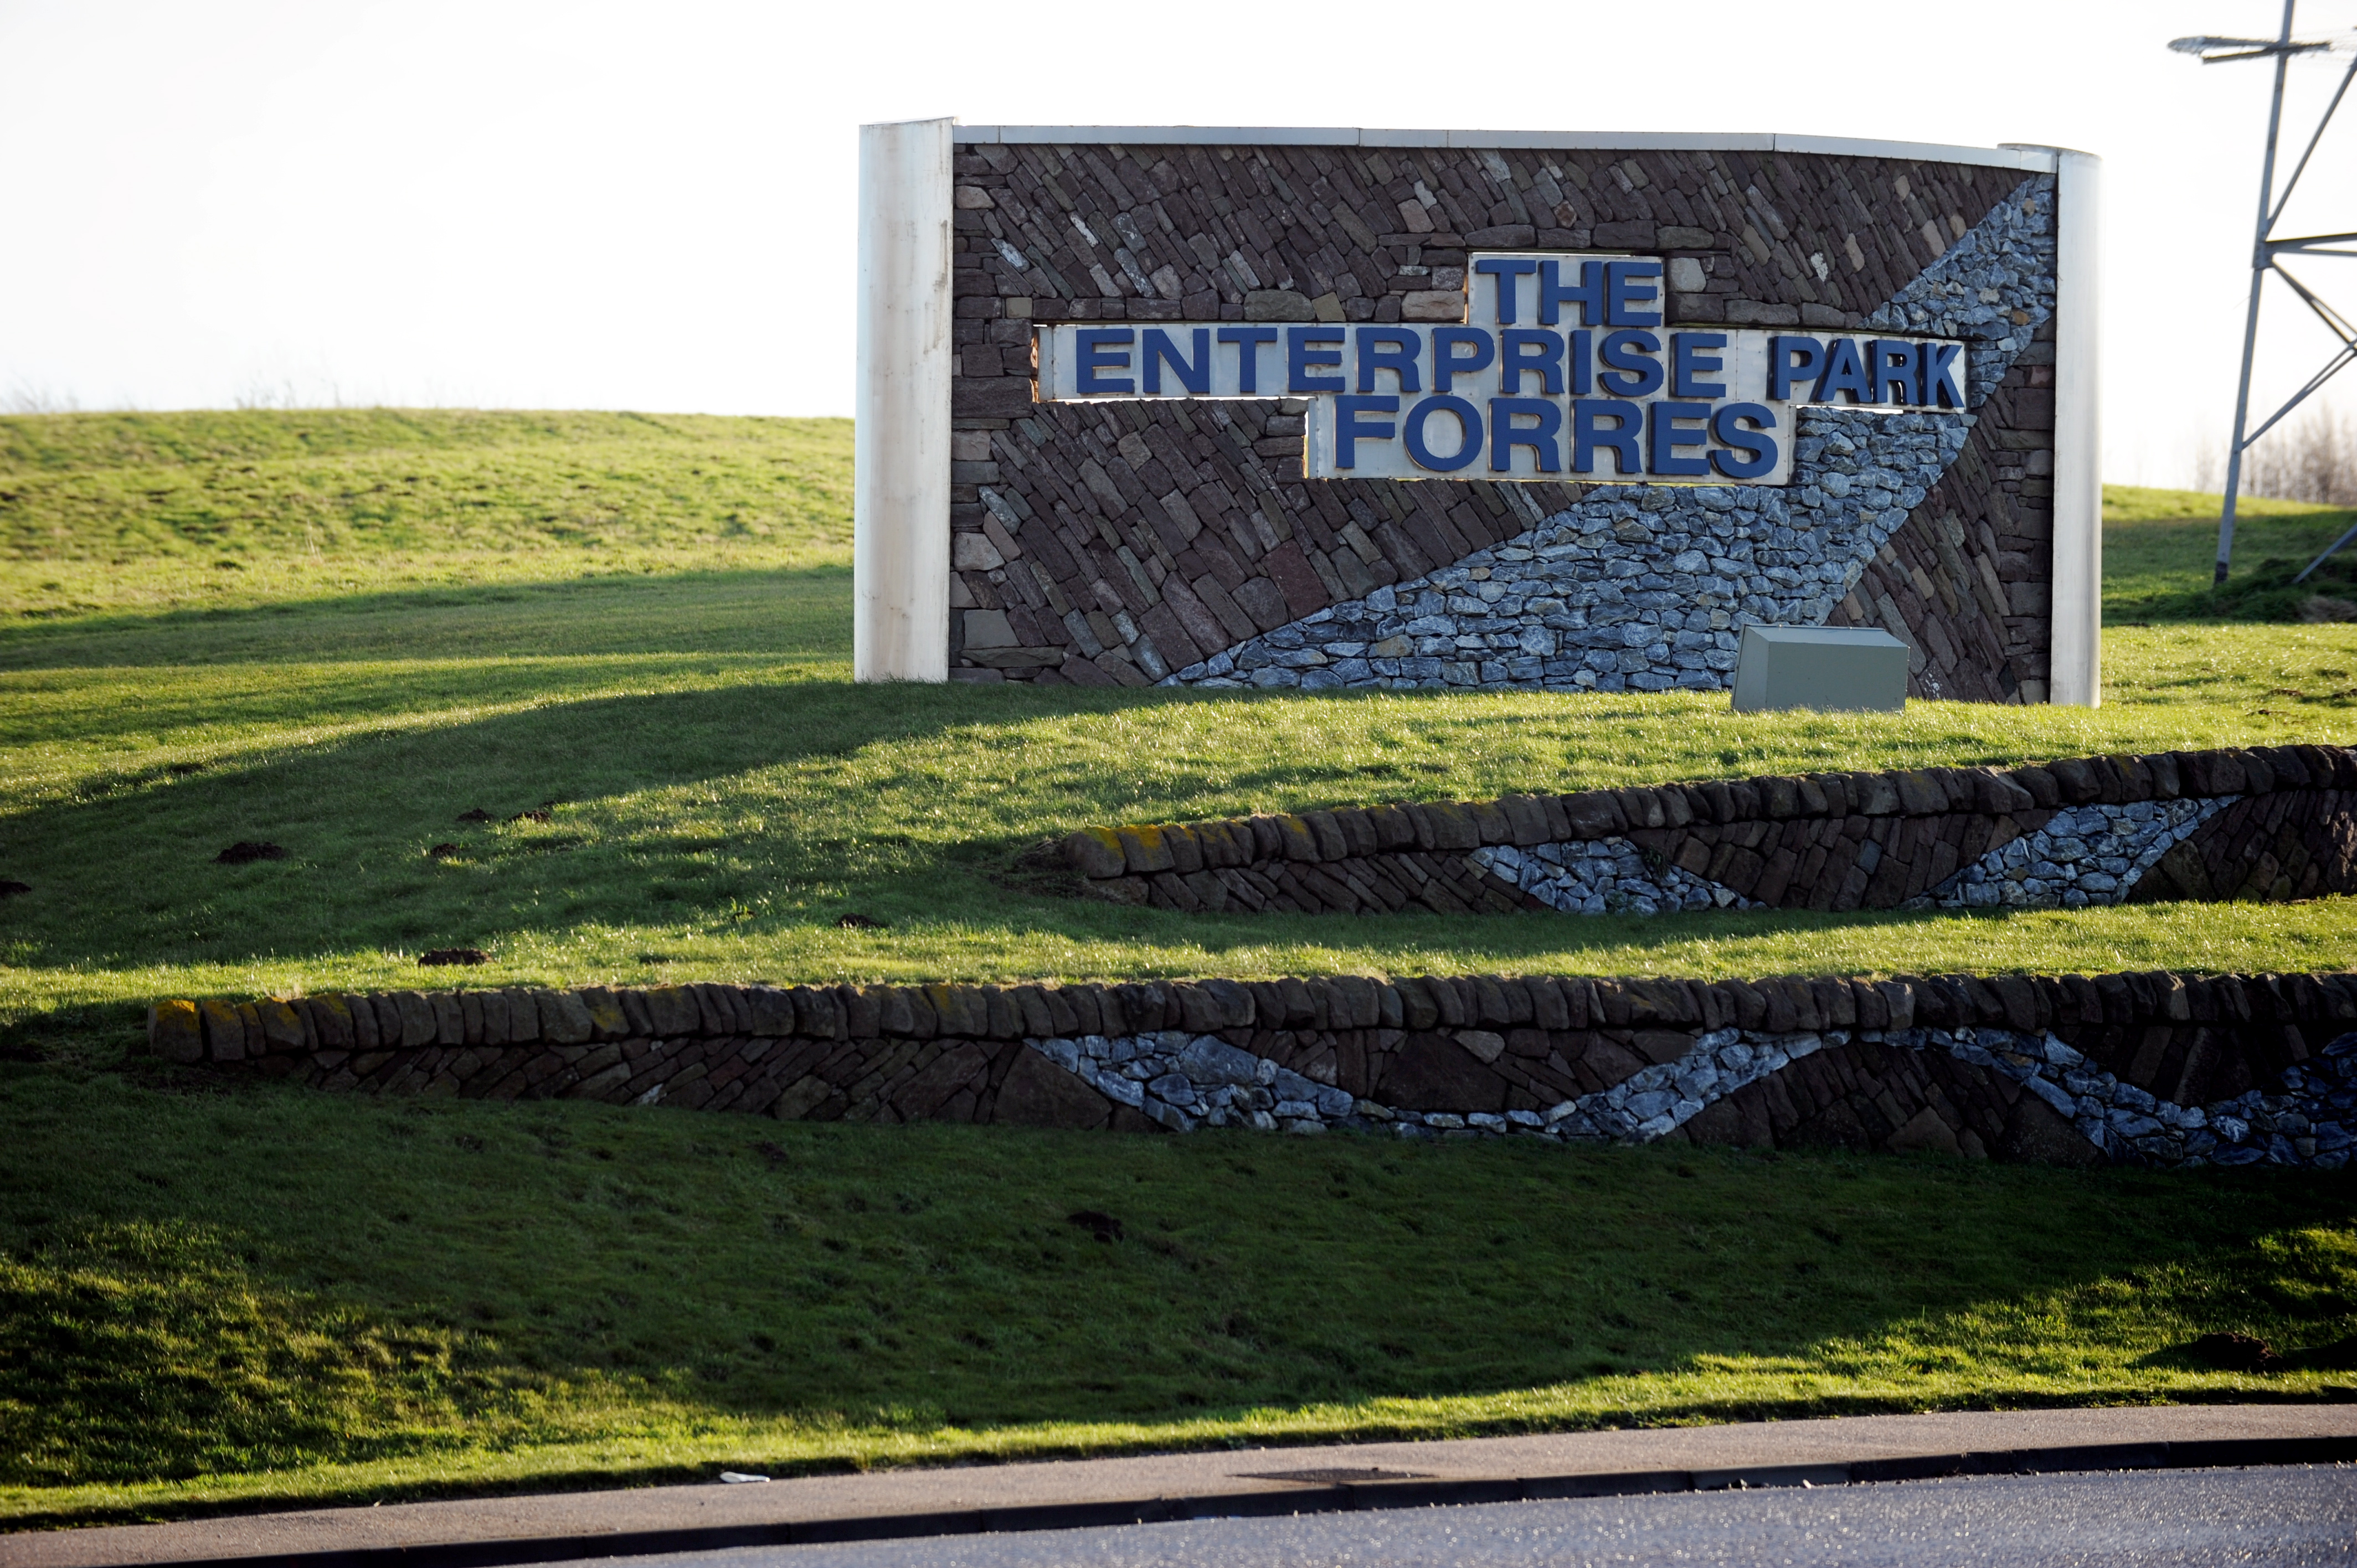 Forres Enterprise Park will be the home of a new £5.6 million manufacturing innovation centre, part of the £100 million Moray Growth Deal.